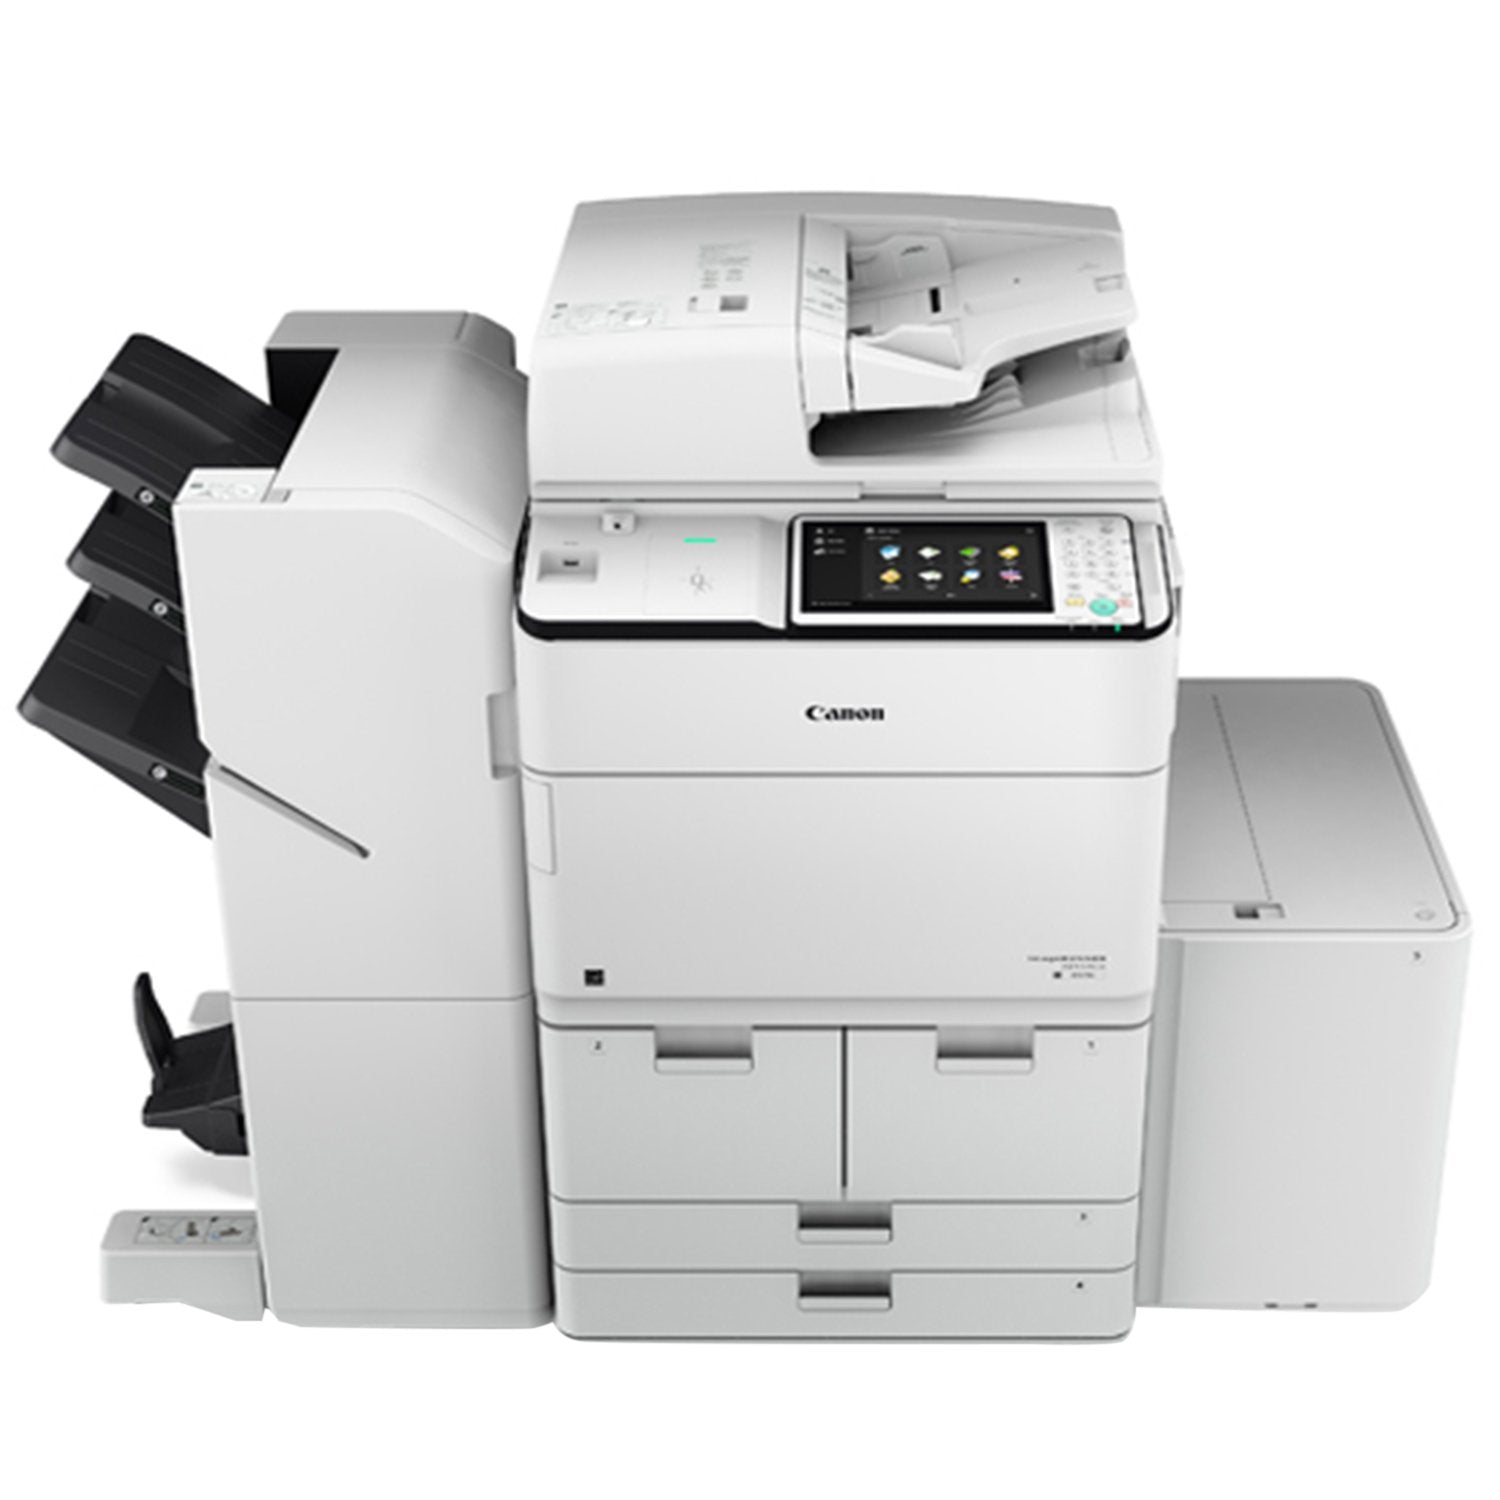 Absolute Toner Canon imageRUNNER ADVANCE 6575i Laser Multifunction Printer Copier For Office, IRA6575i Showroom Monochrome Copiers